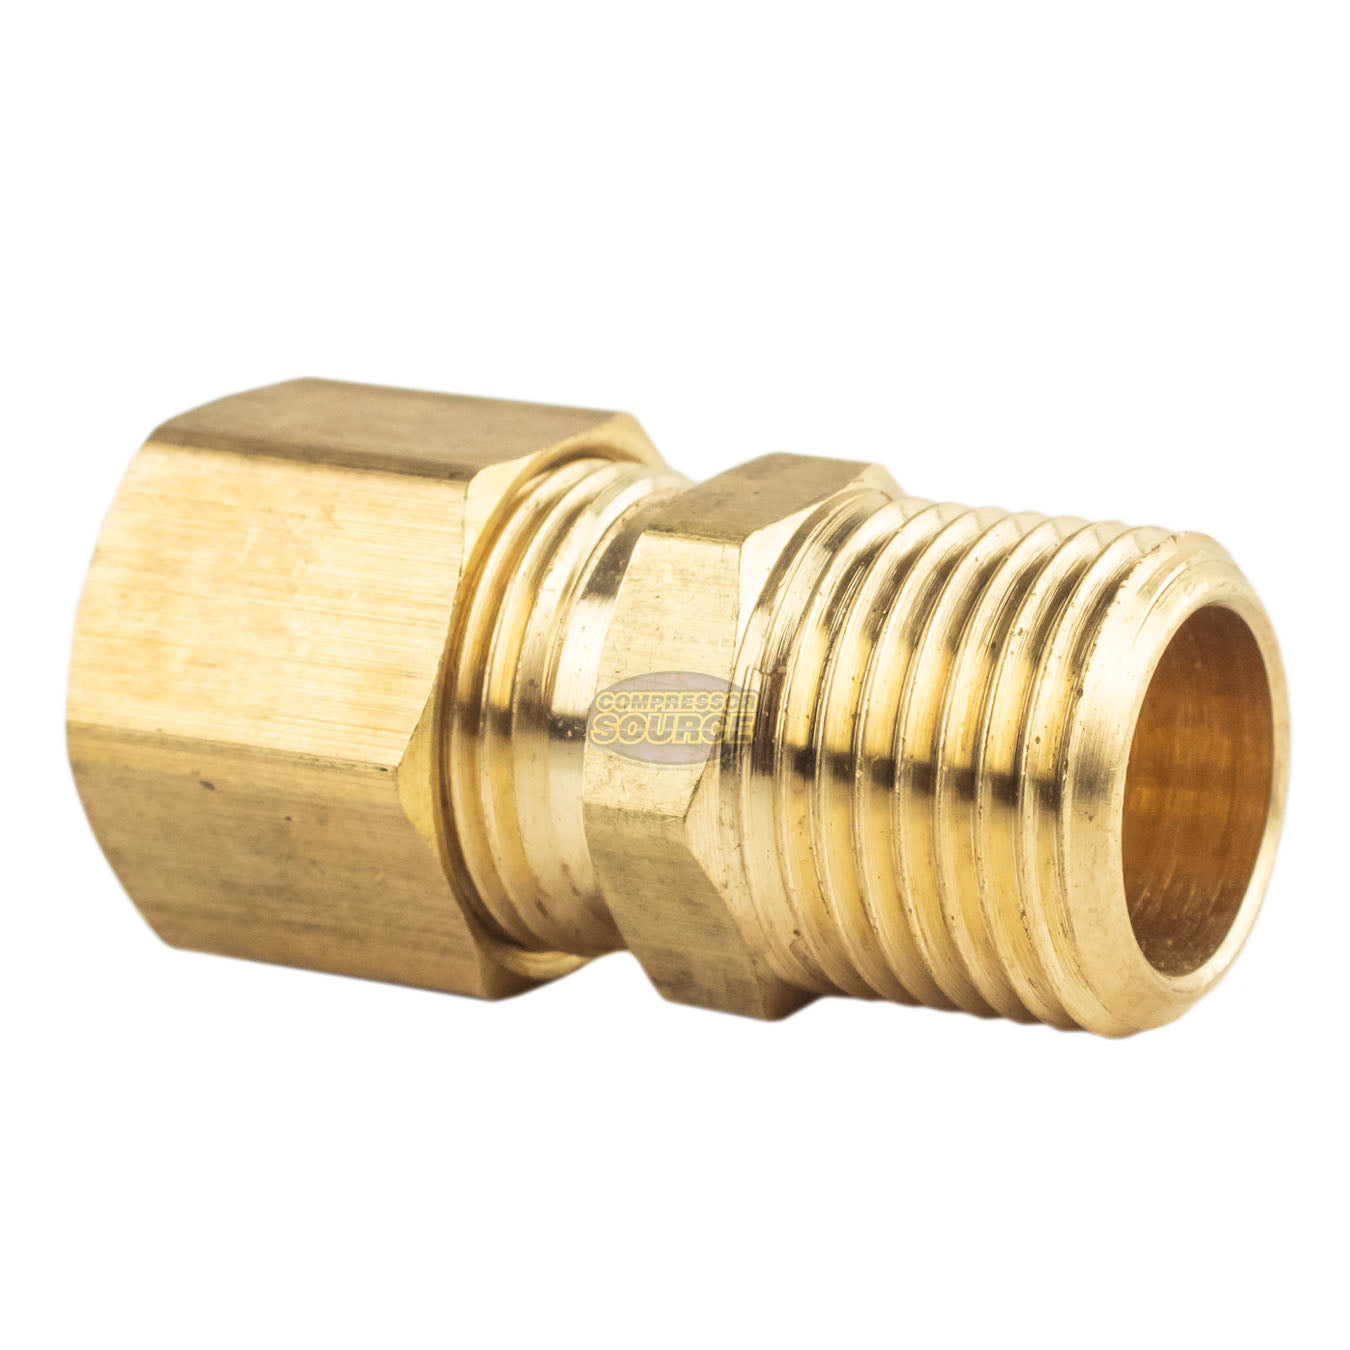 Compression Tube Fitting 1/2 Tube OD x 1/2 NPT Male Connector